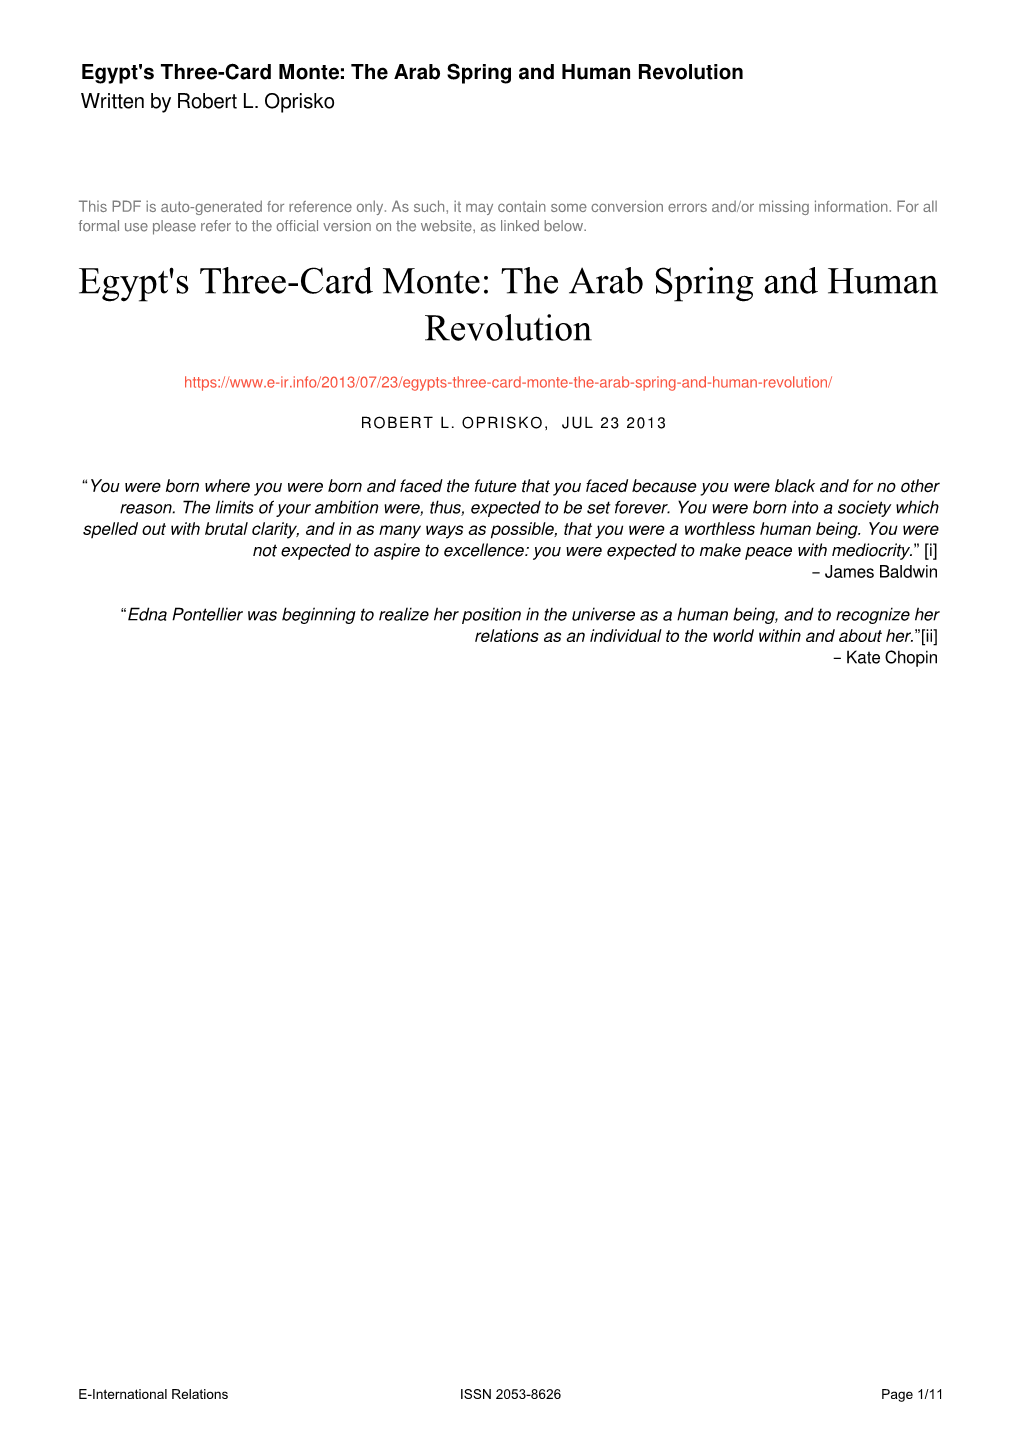 Egypt's Three-Card Monte: the Arab Spring and Human Revolution Written by Robert L